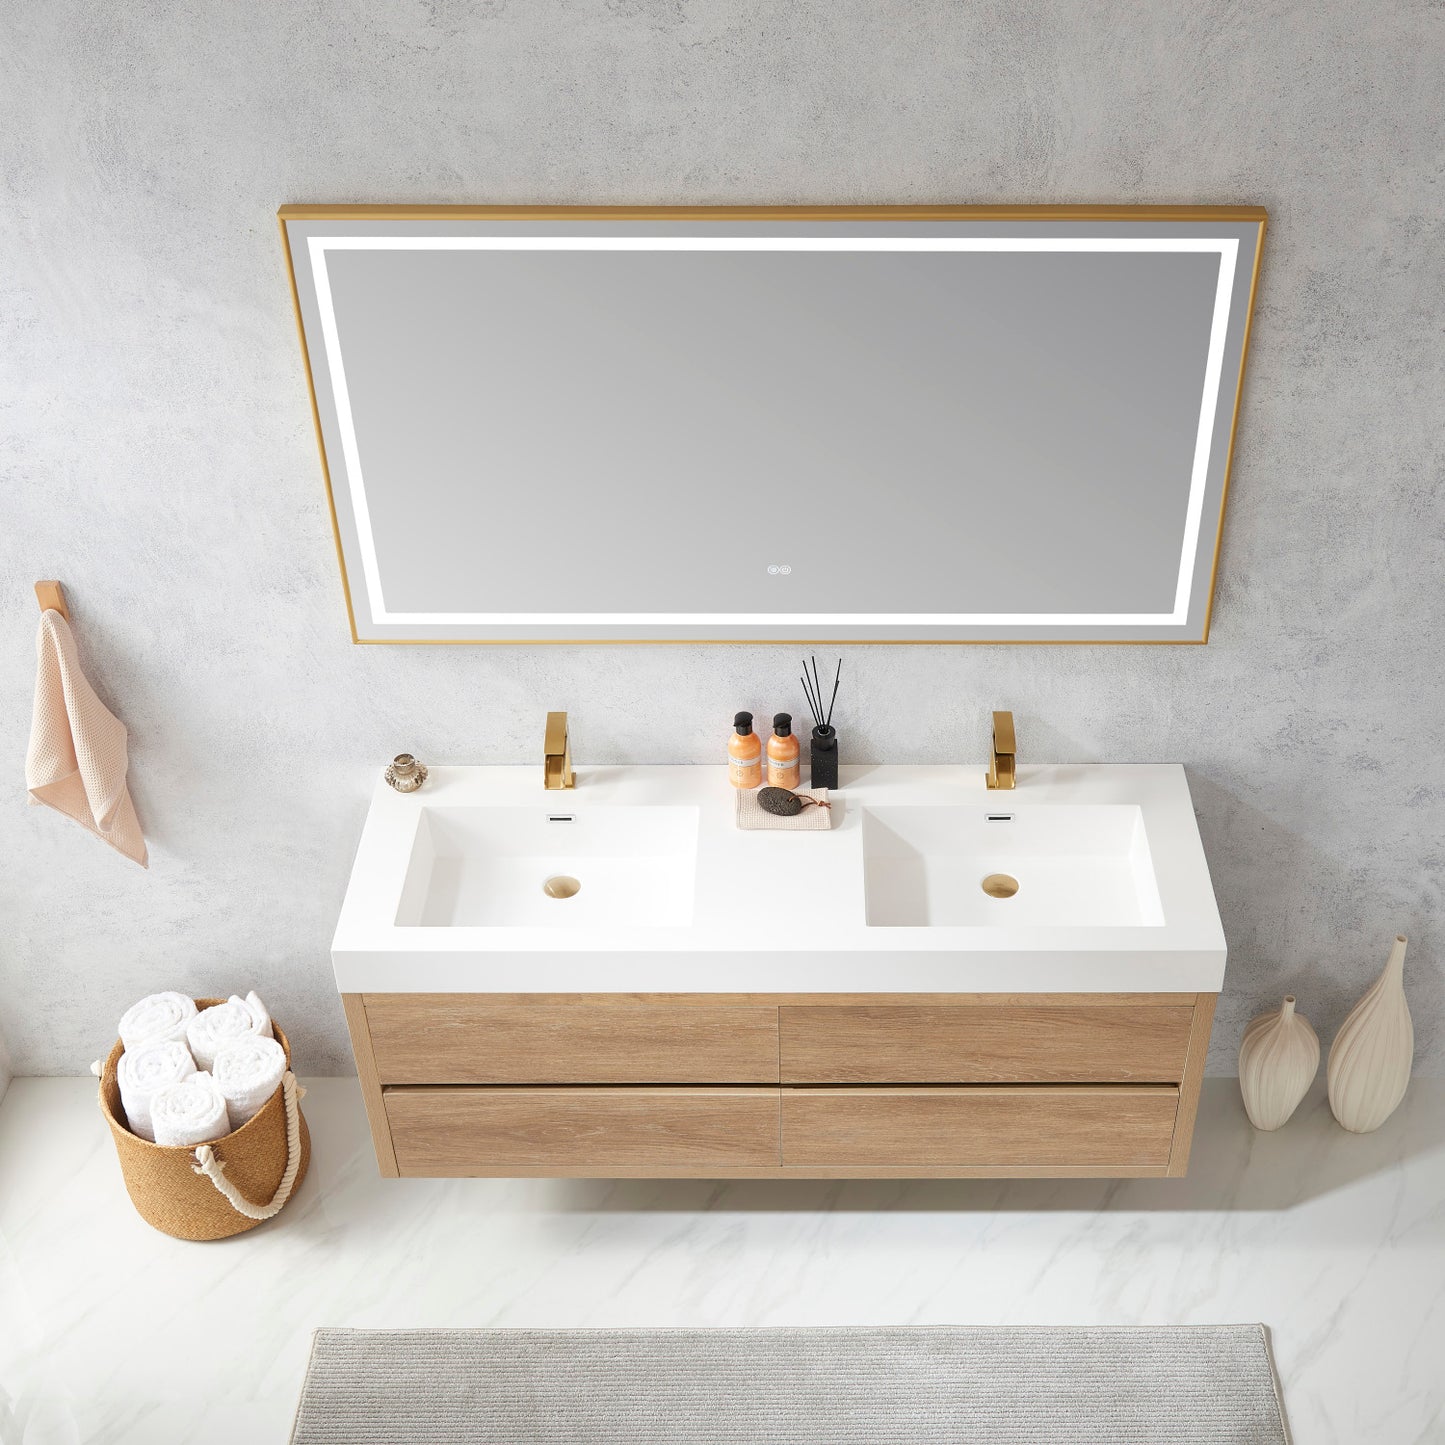 Palencia 60M" Double Sink Wall-Mount Bath Vanity in North American Oak with White Composite Integral Square Sink Top and Mirror